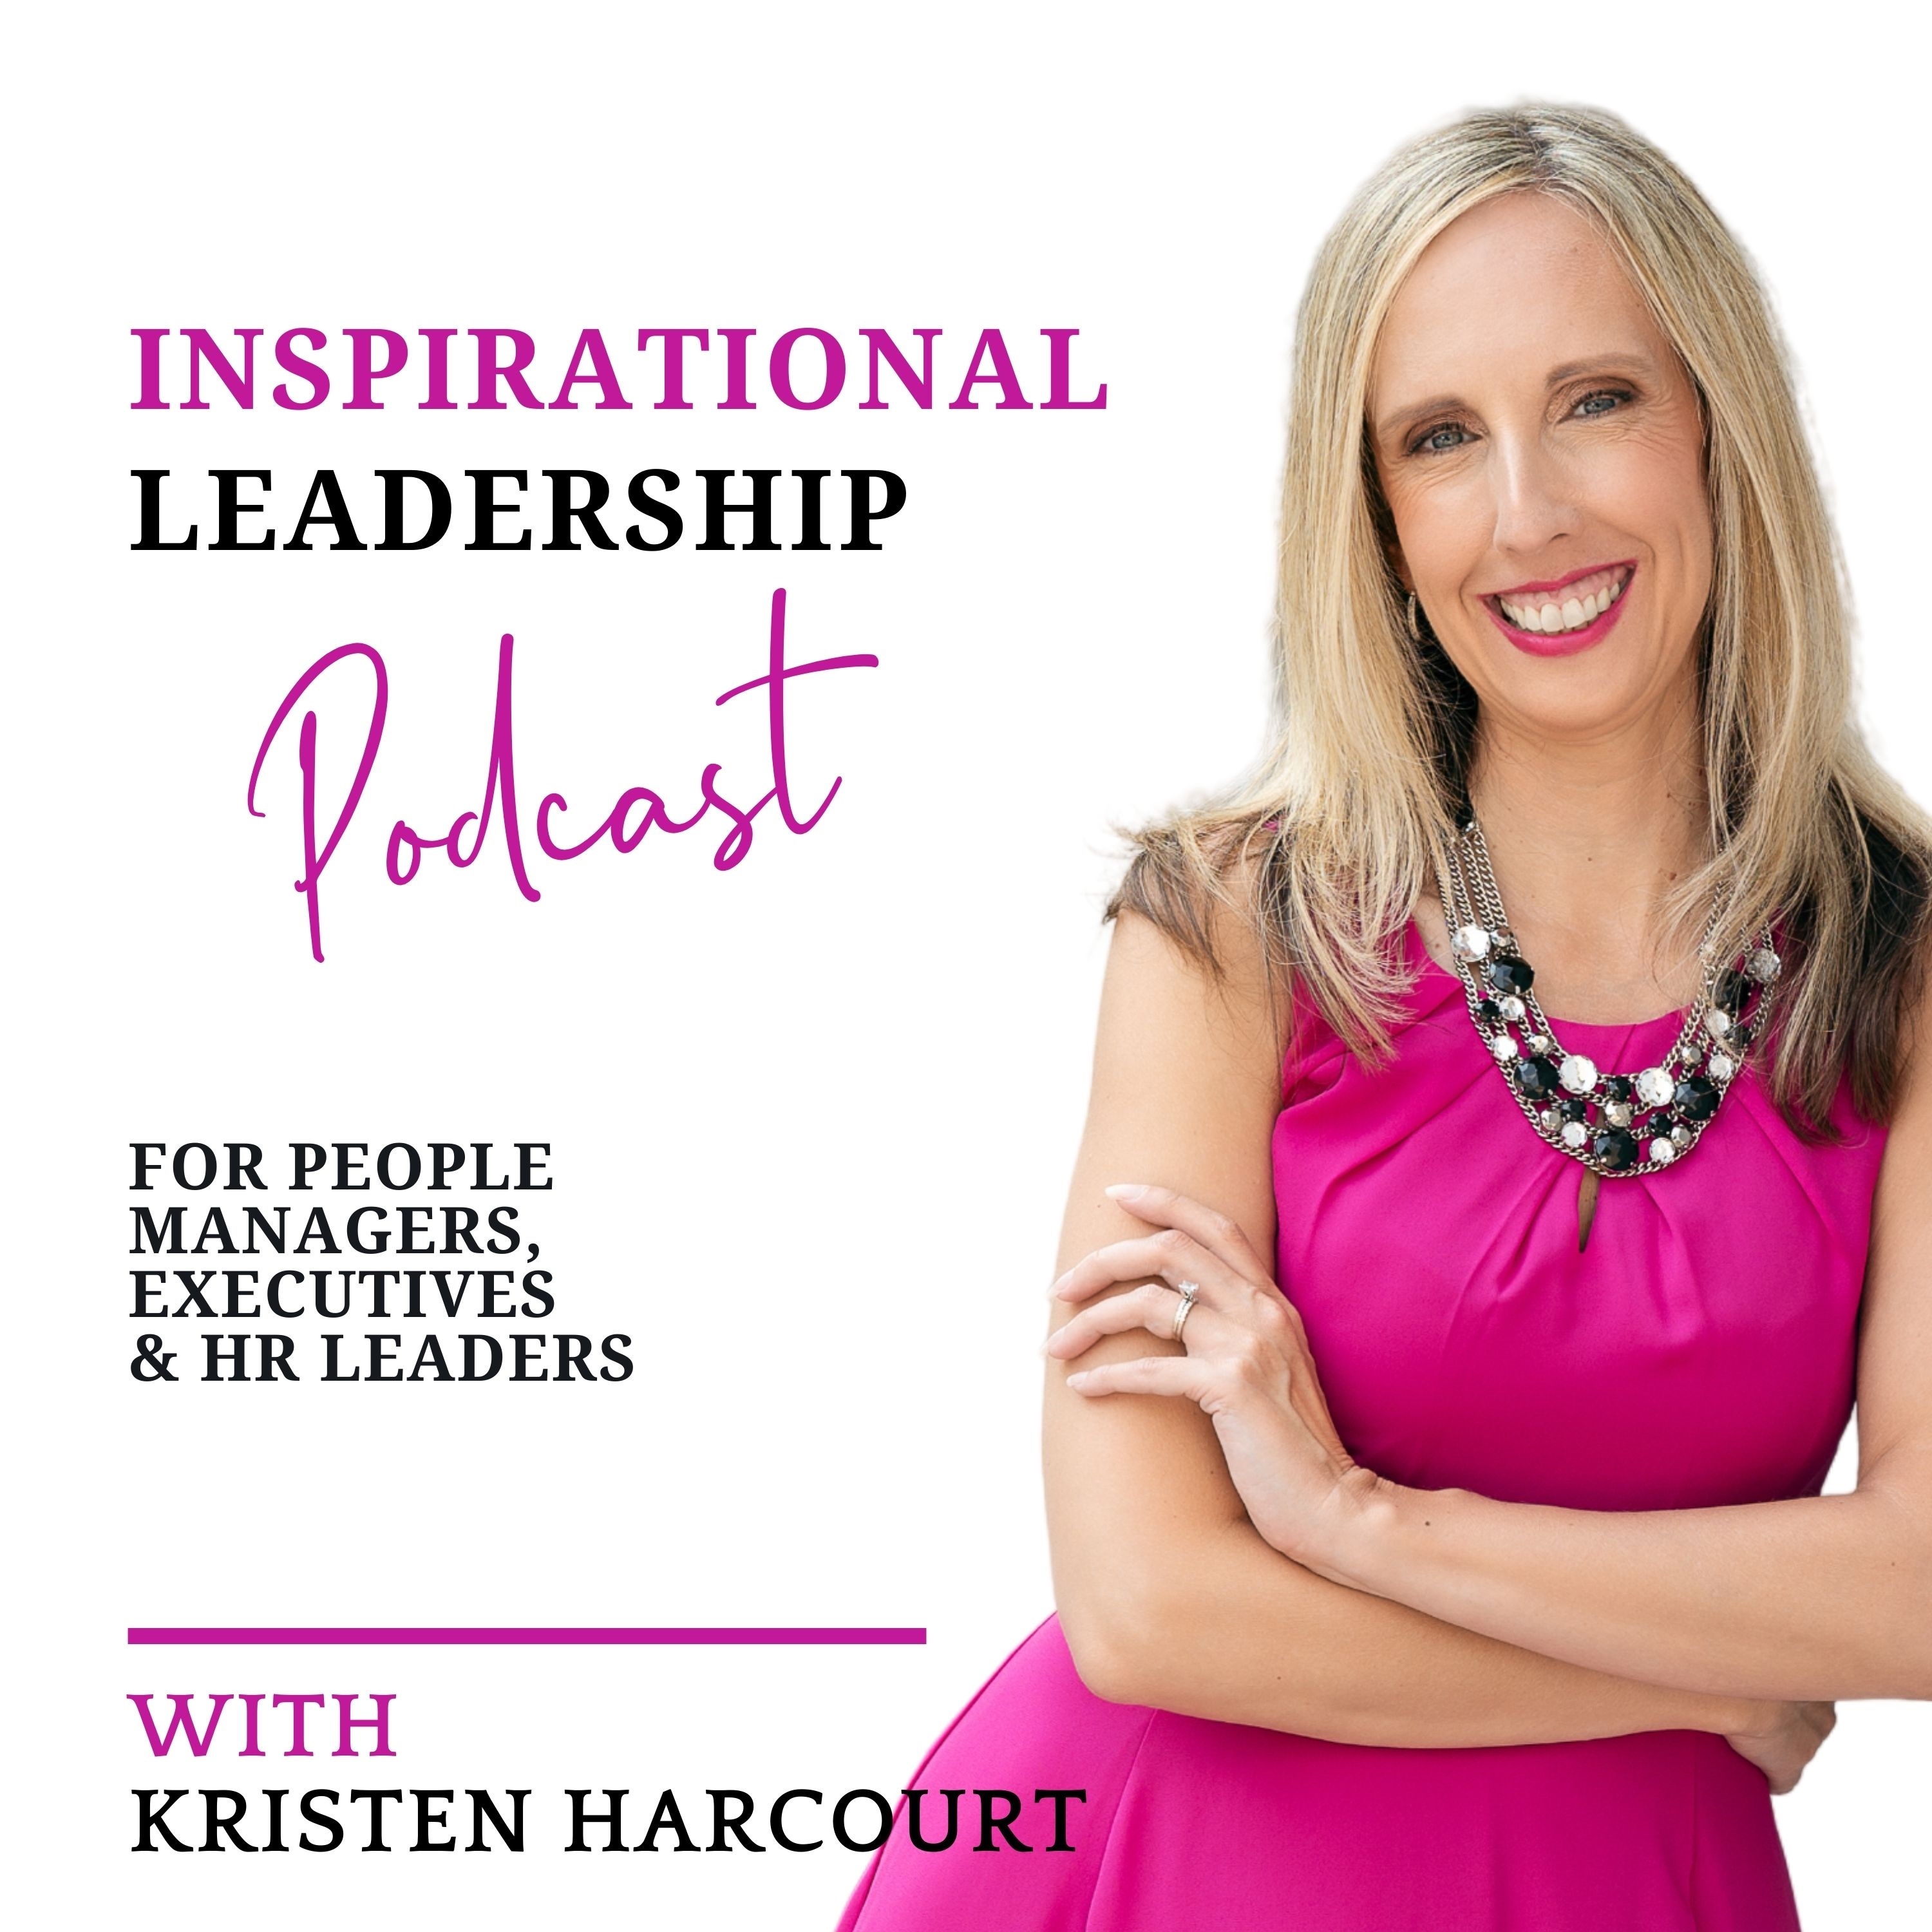 Inspirational Leadership for People Managers, Executives & HR Leaders